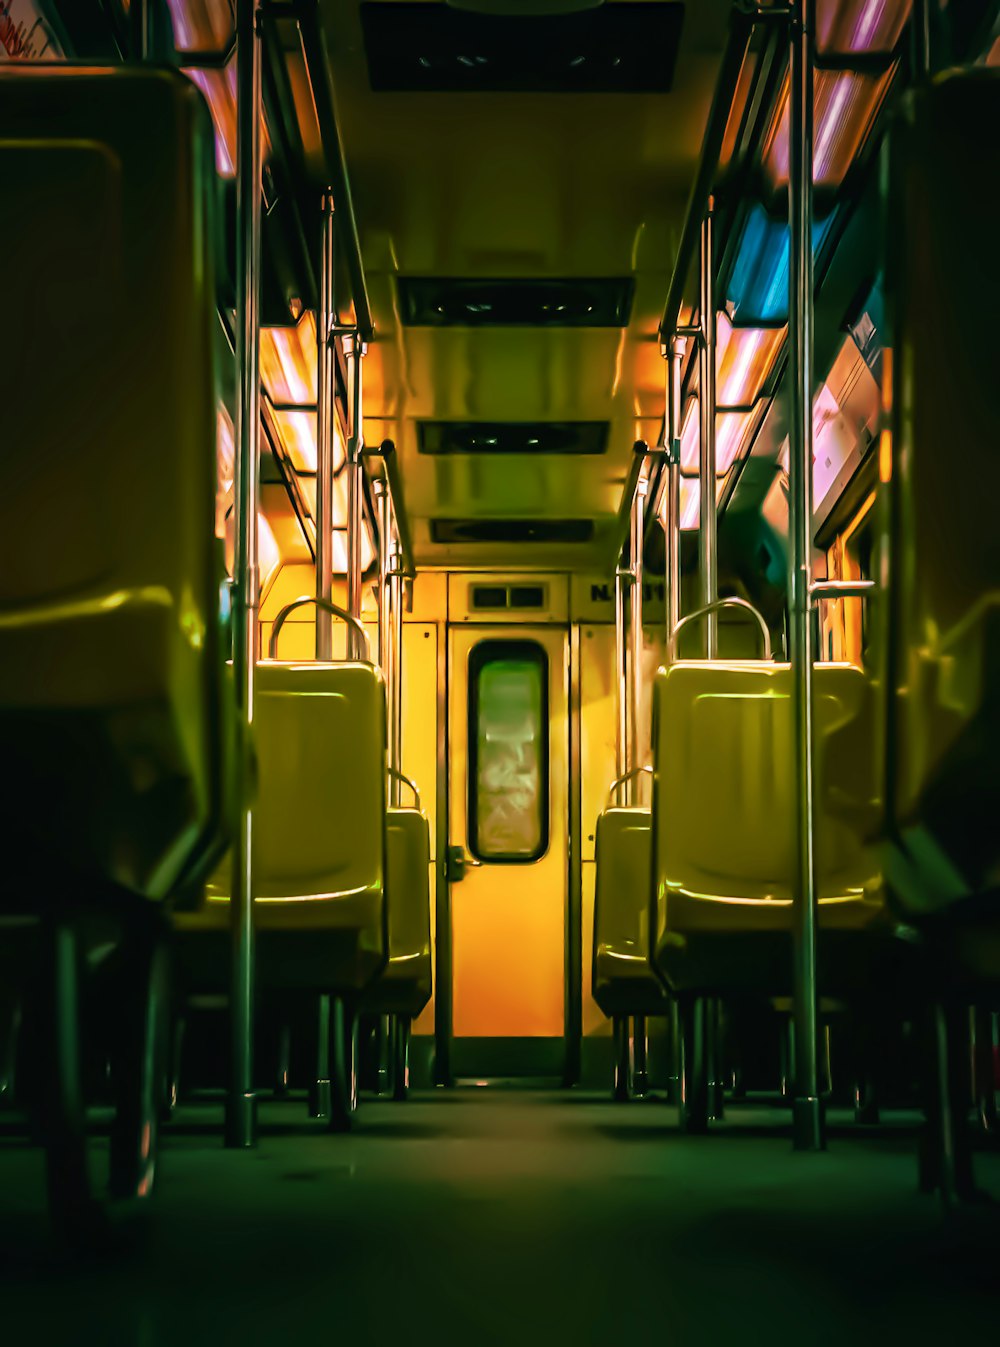 a train car filled with lots of yellow seats